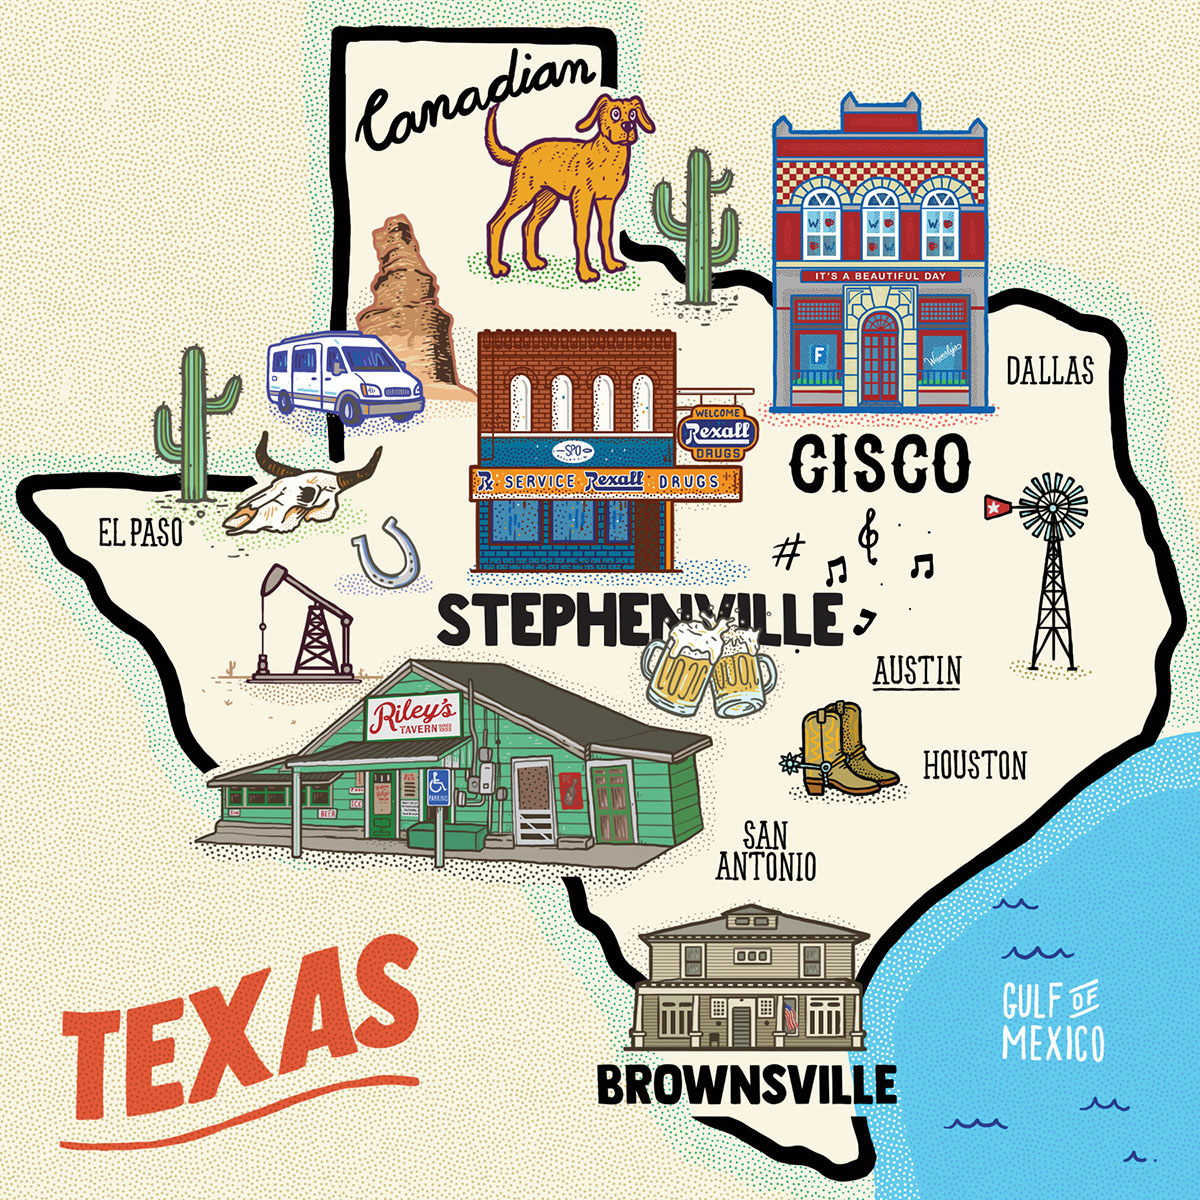 An illustrated map of several cities and places in Texas visited by the author